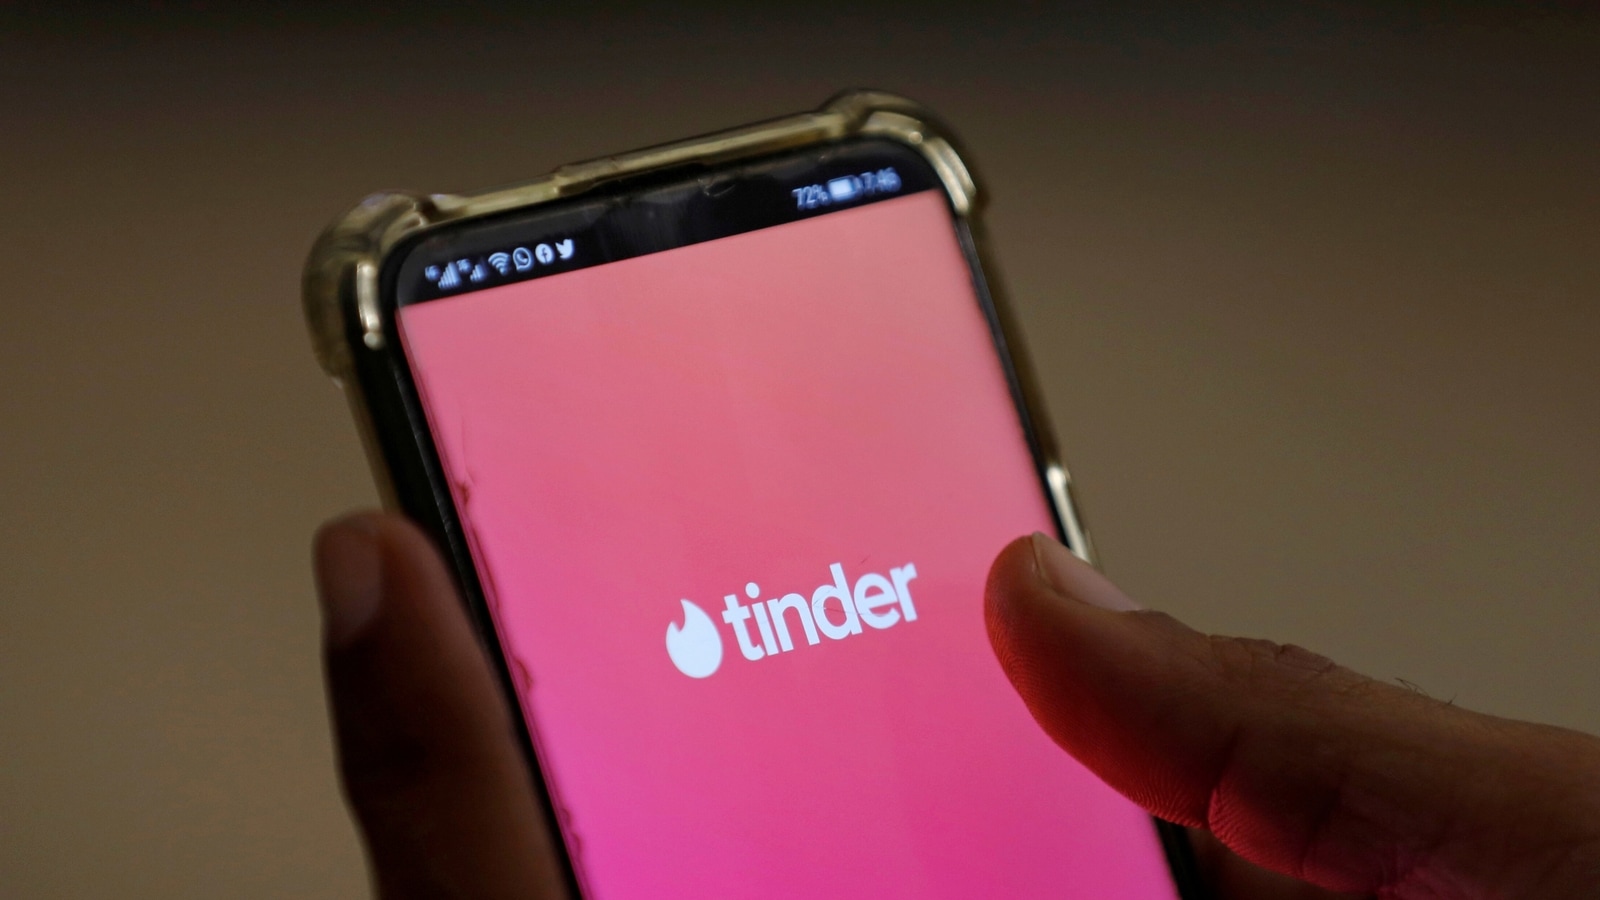 Phone tinder number without Can You